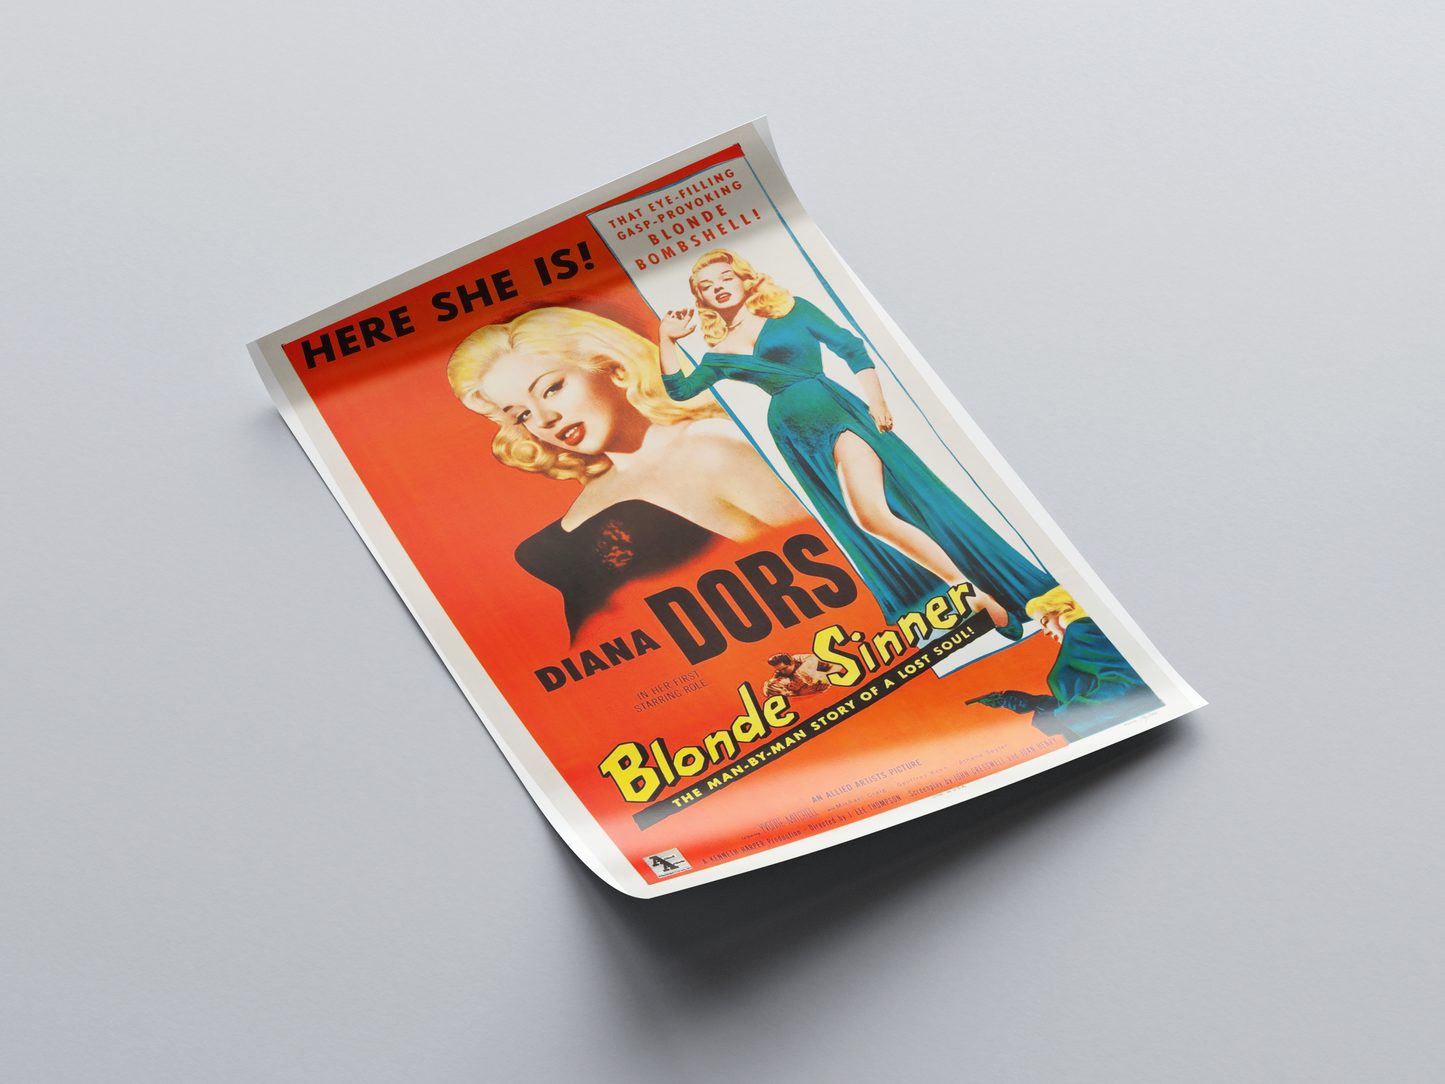 Yield to the Night (also titled Blonde Sinner in the US - 1956)